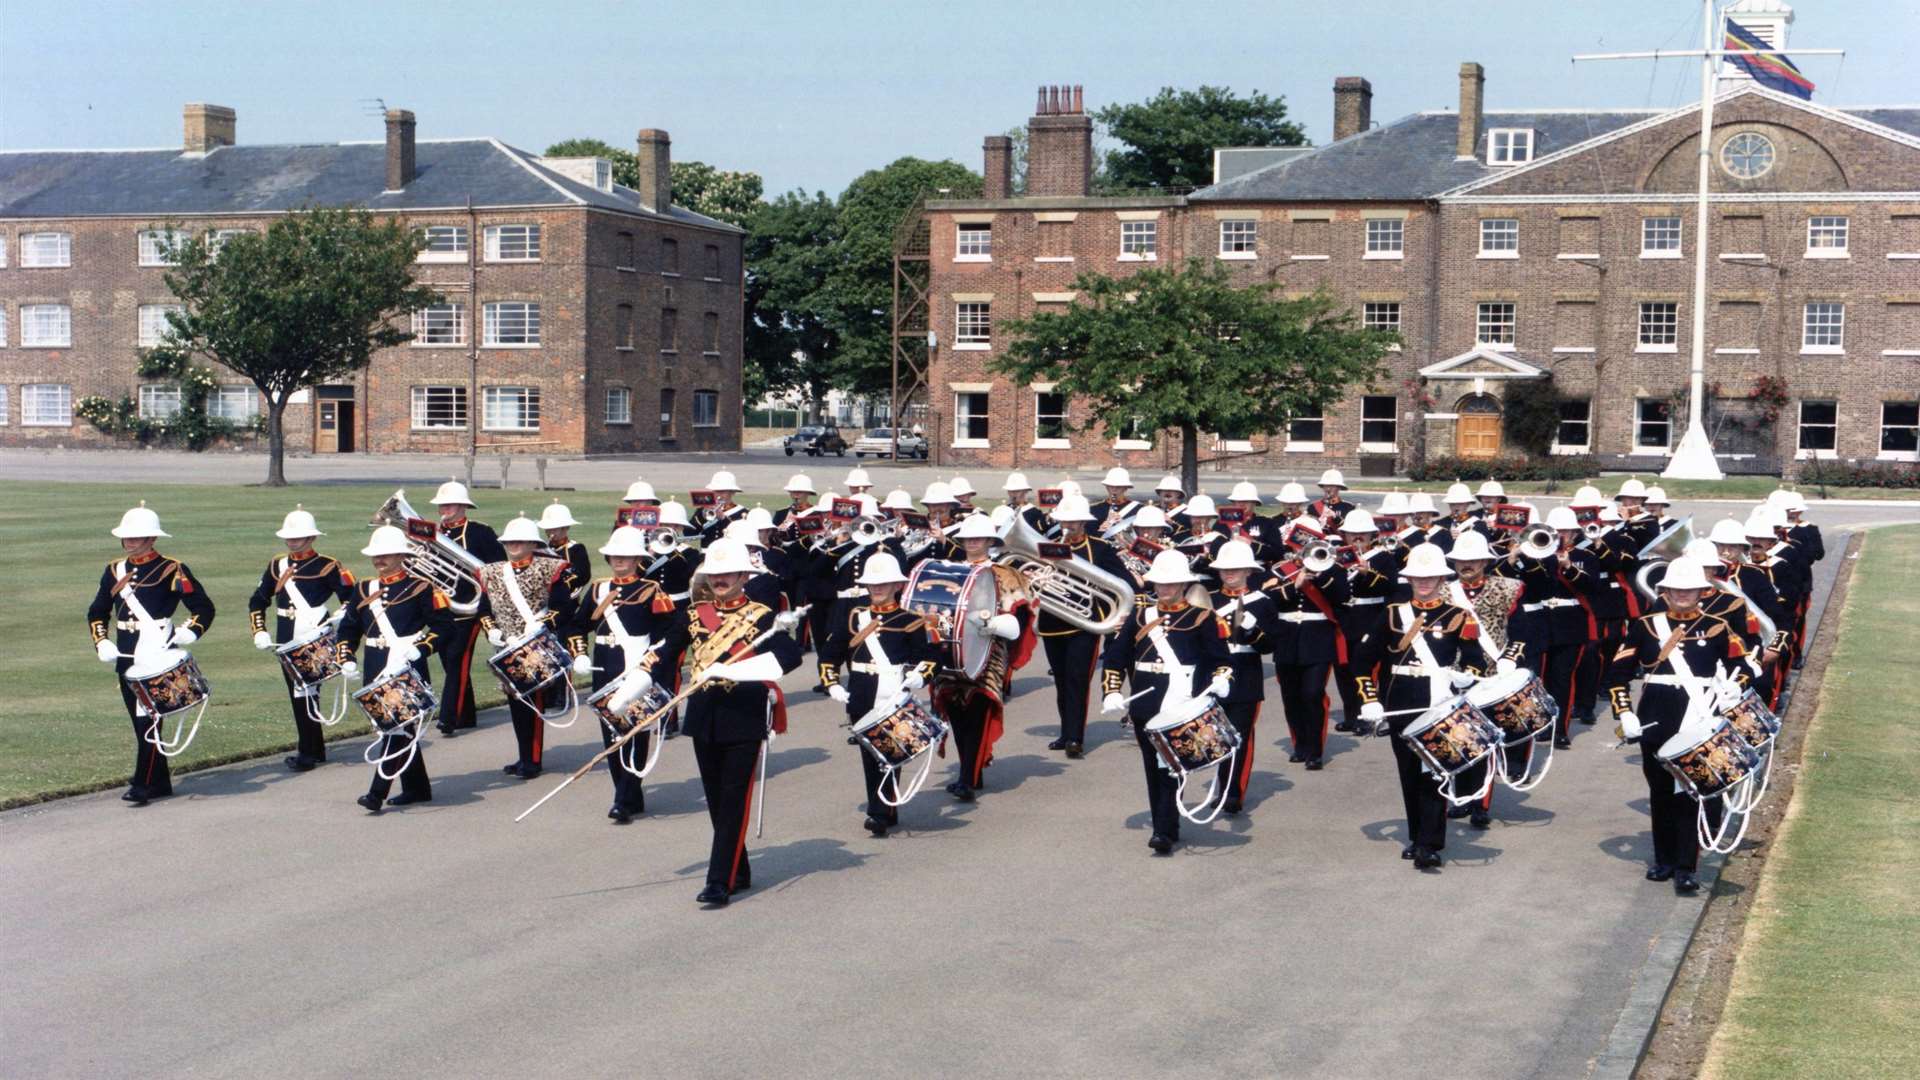 The Staff Band of the Royal Marines marching at South Barracks